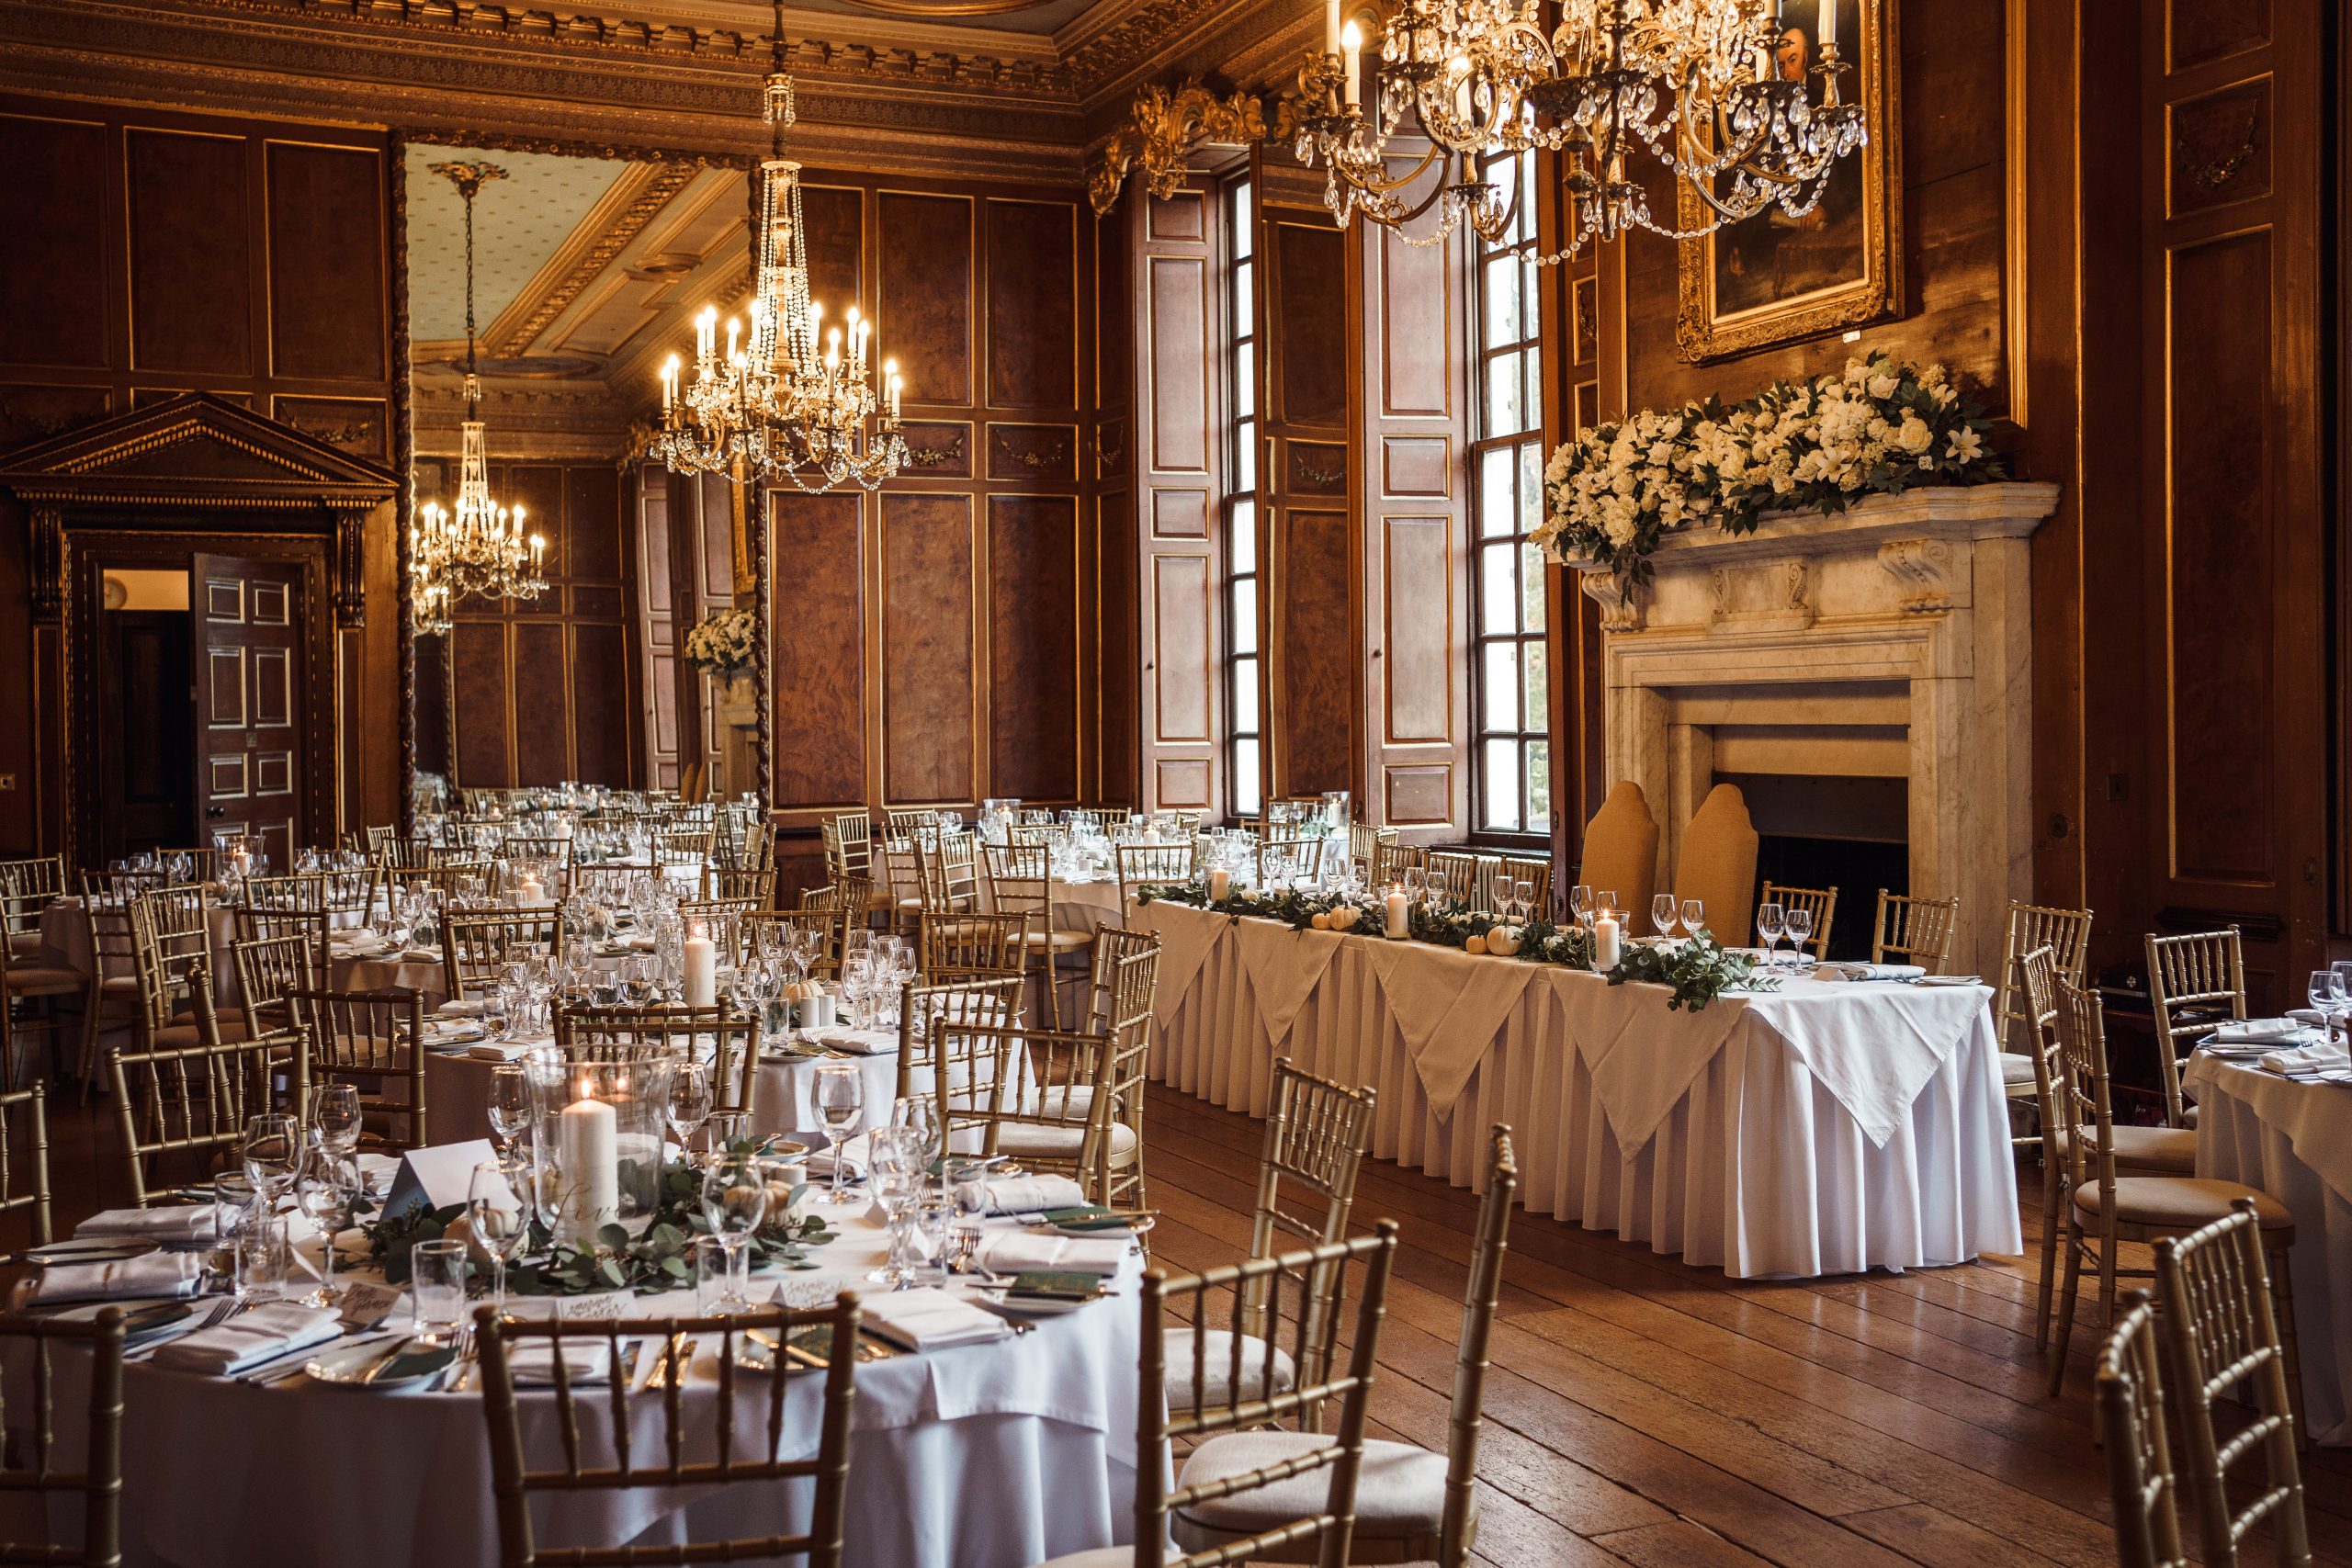 Our list and guide to our favourite WEDDING VENUES in Essex